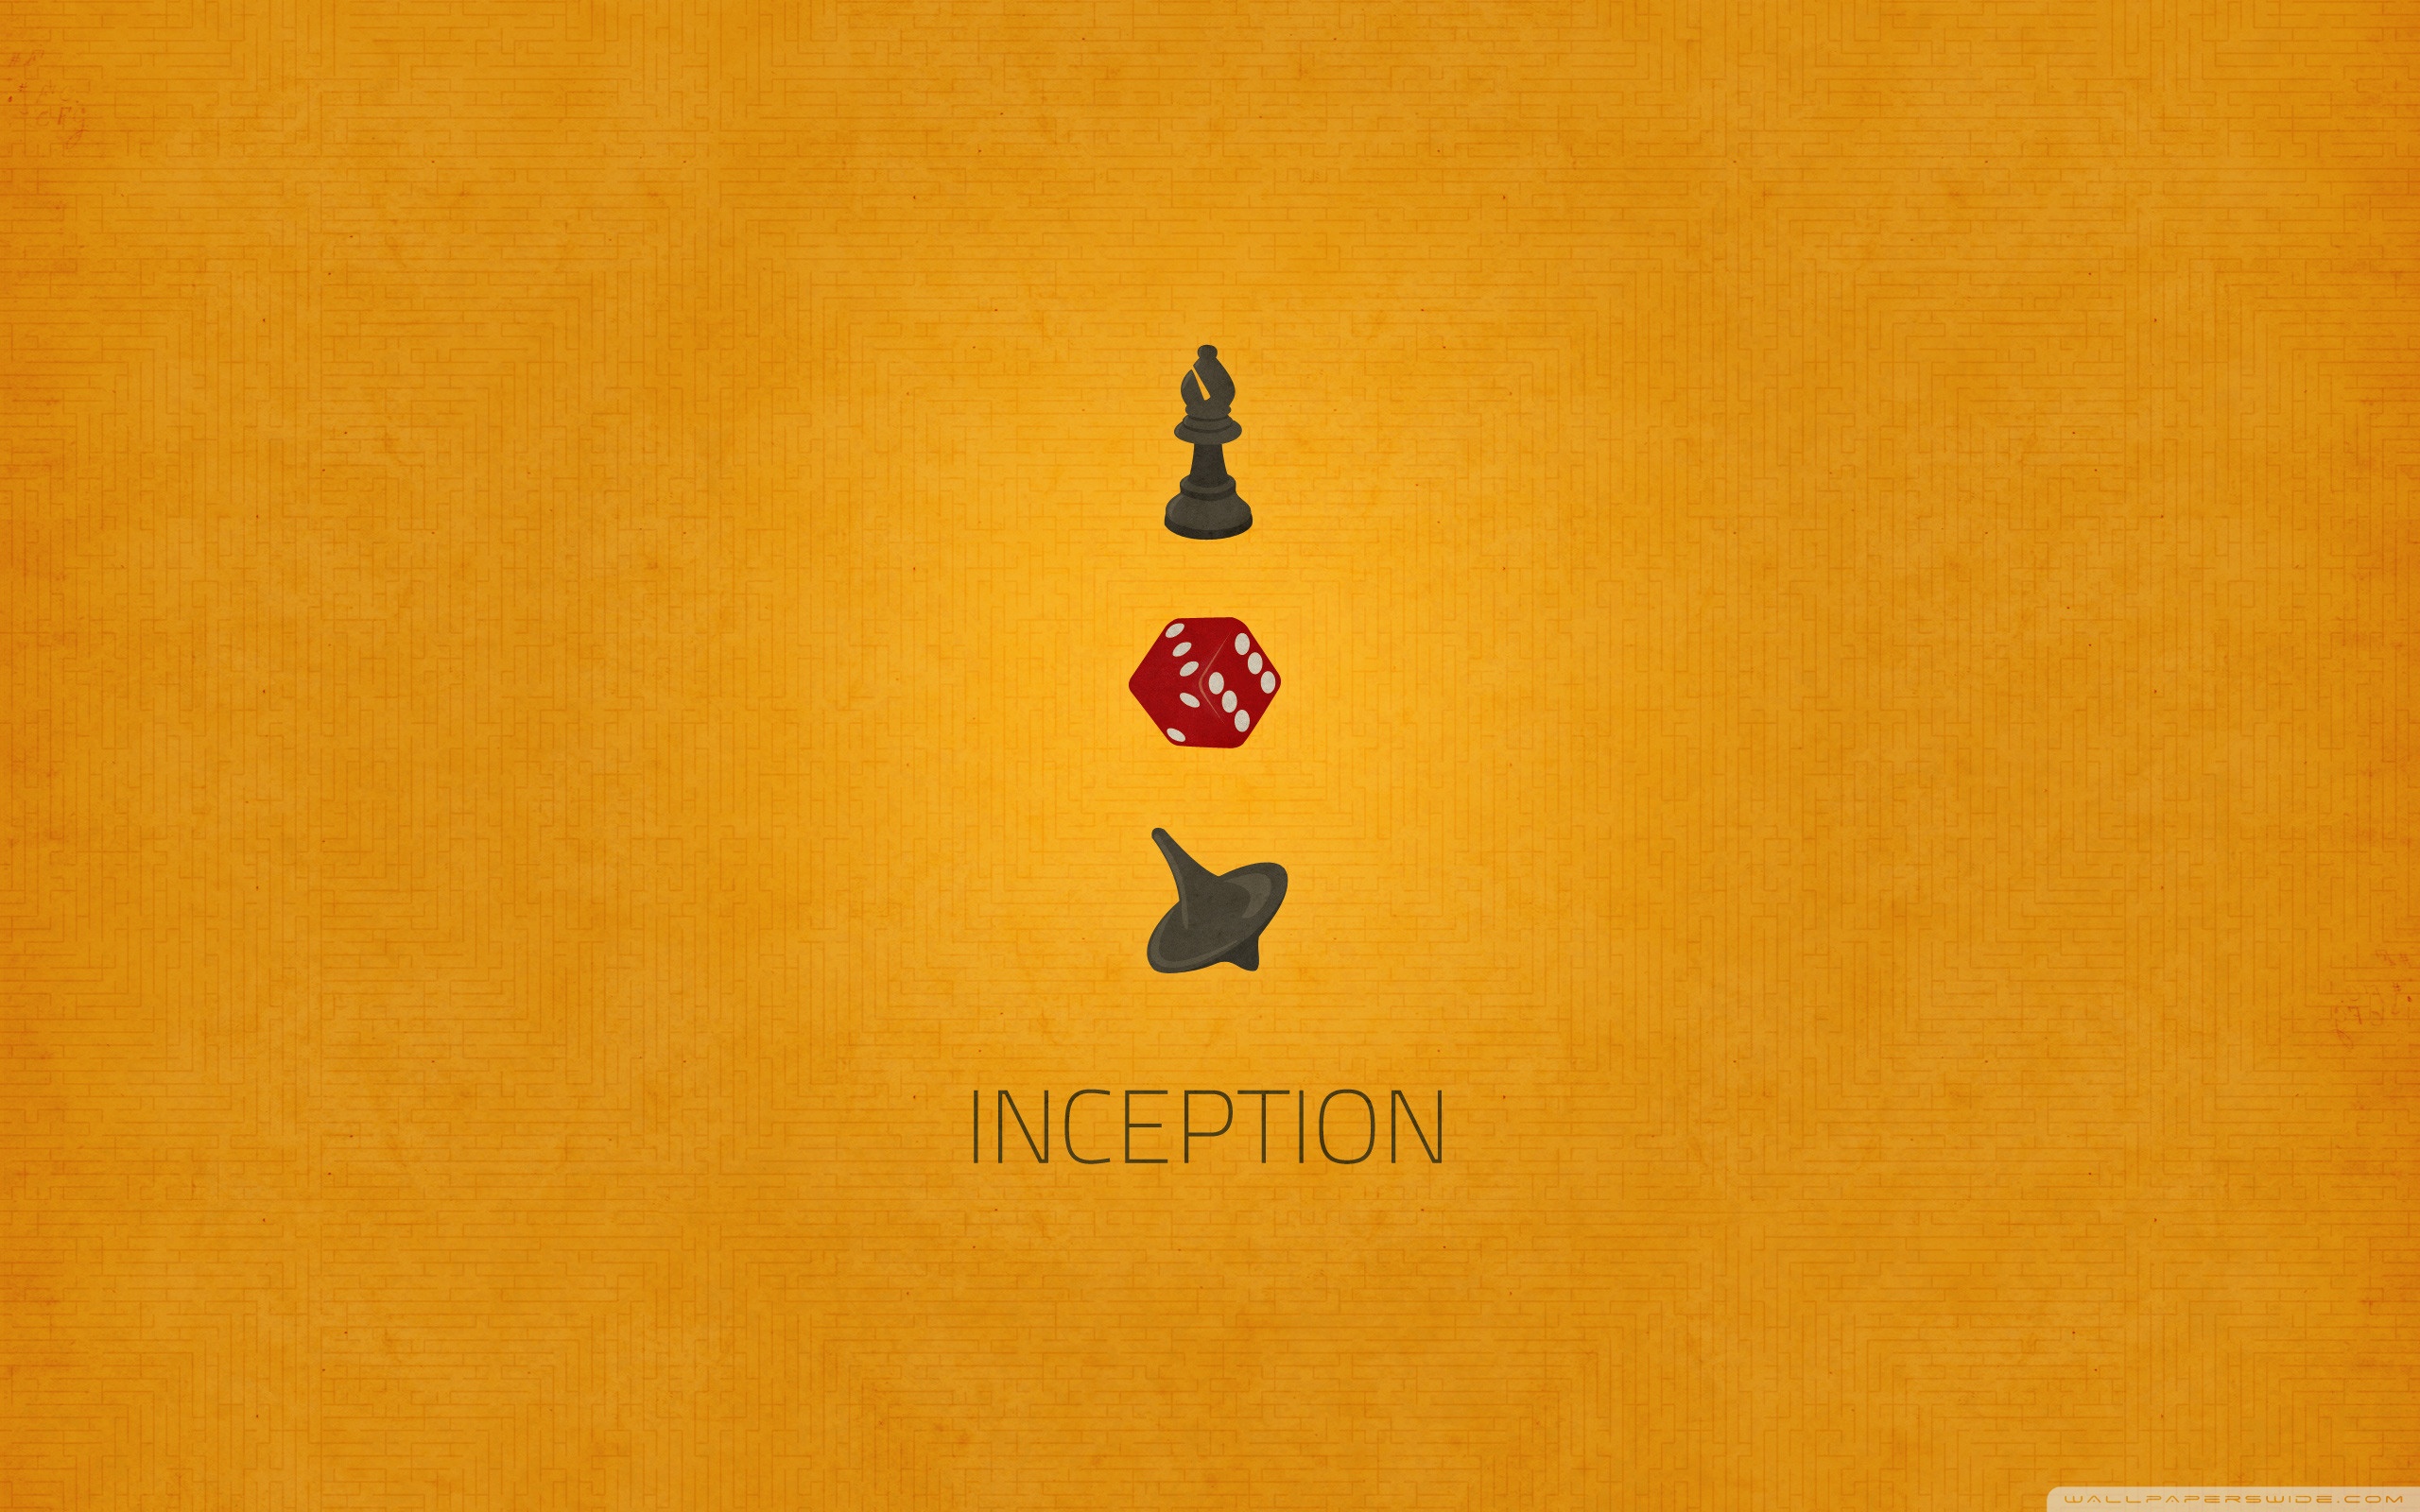 inception wallpaper  Online Discount Shop for Electronics Apparel Toys  Books Games Computers Shoes Jewelry Watches Baby Products Sports   Outdoors Office Products Bed  Bath Furniture Tools Hardware  Automotive Parts Accessories